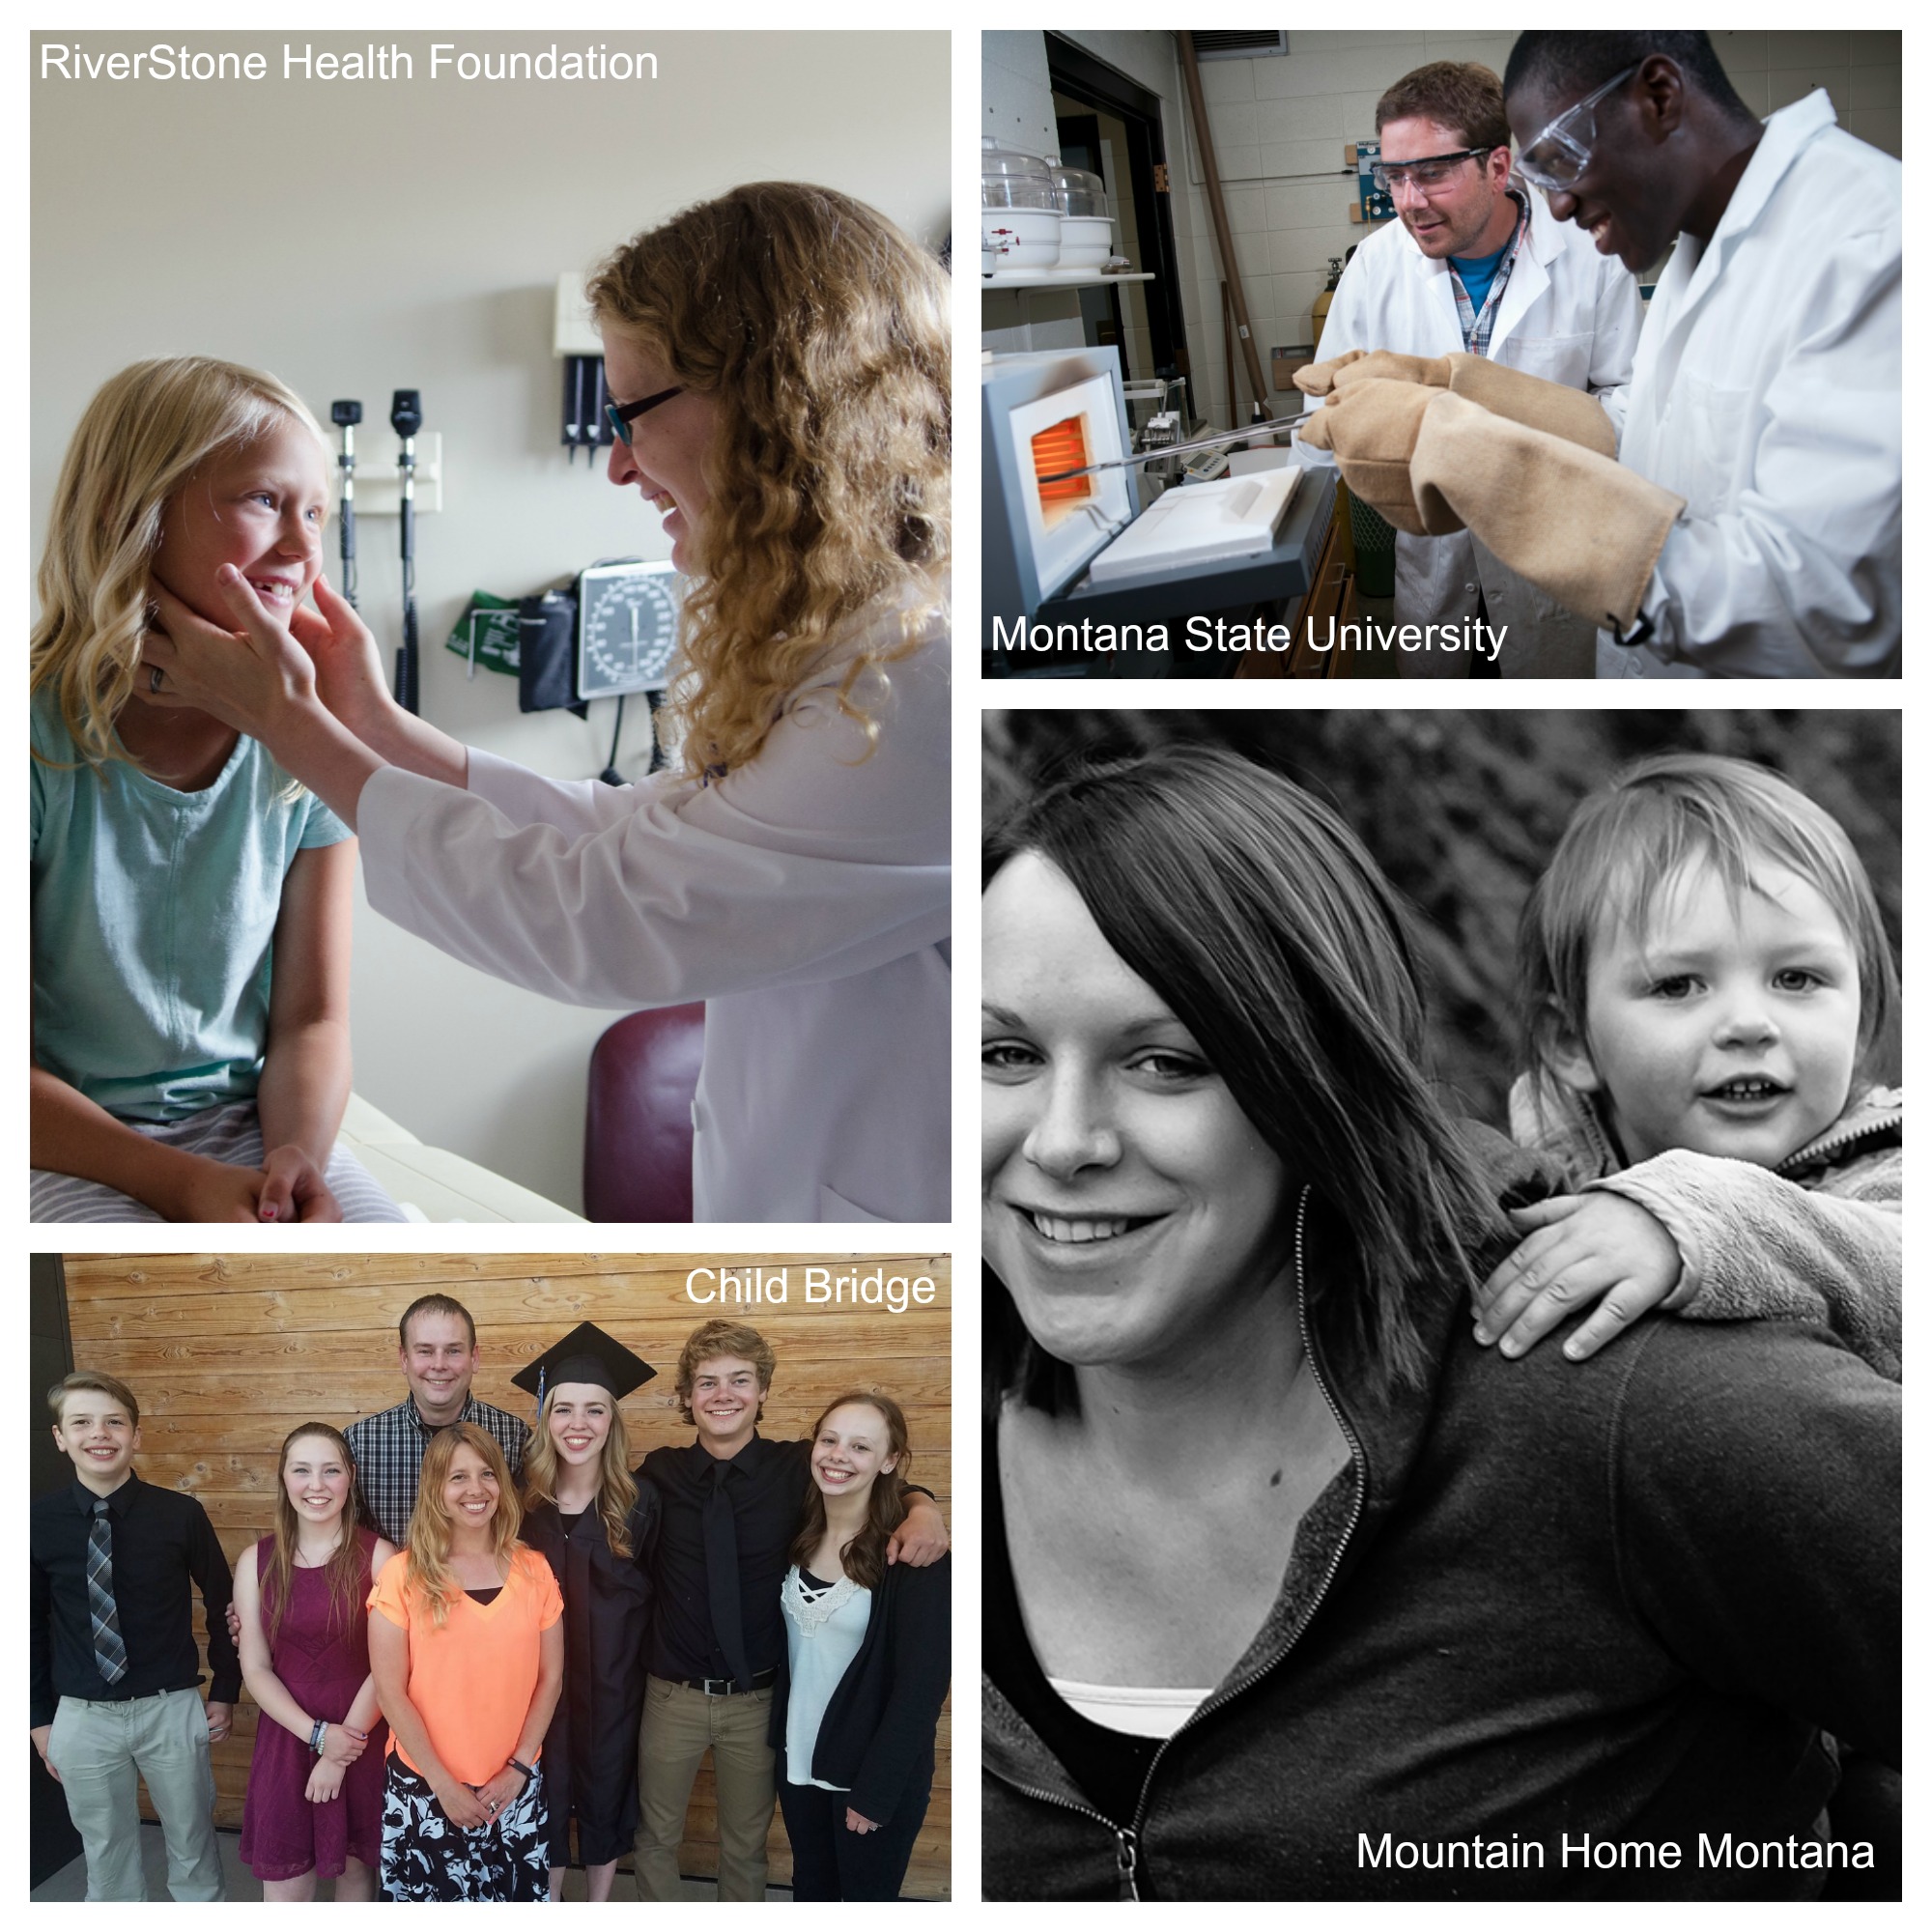 Image 1: a young girl with blond hair looks at a nurse wearing glasses, while sitting in a health facility. Text overlay says "RiverStone Health Foundation." Image 2: six people stand around a girl wearing a graduation cap and gown, smiling for the camera. Text overlay says "Child Bridge." Image 3: two men wearing white lab goats and goggles in a science lab. Text overlay says "Montana State University." Image 4: a young child on a young woman's back, smiling for the camera. Text overlay says "Mountain Home Montana." 